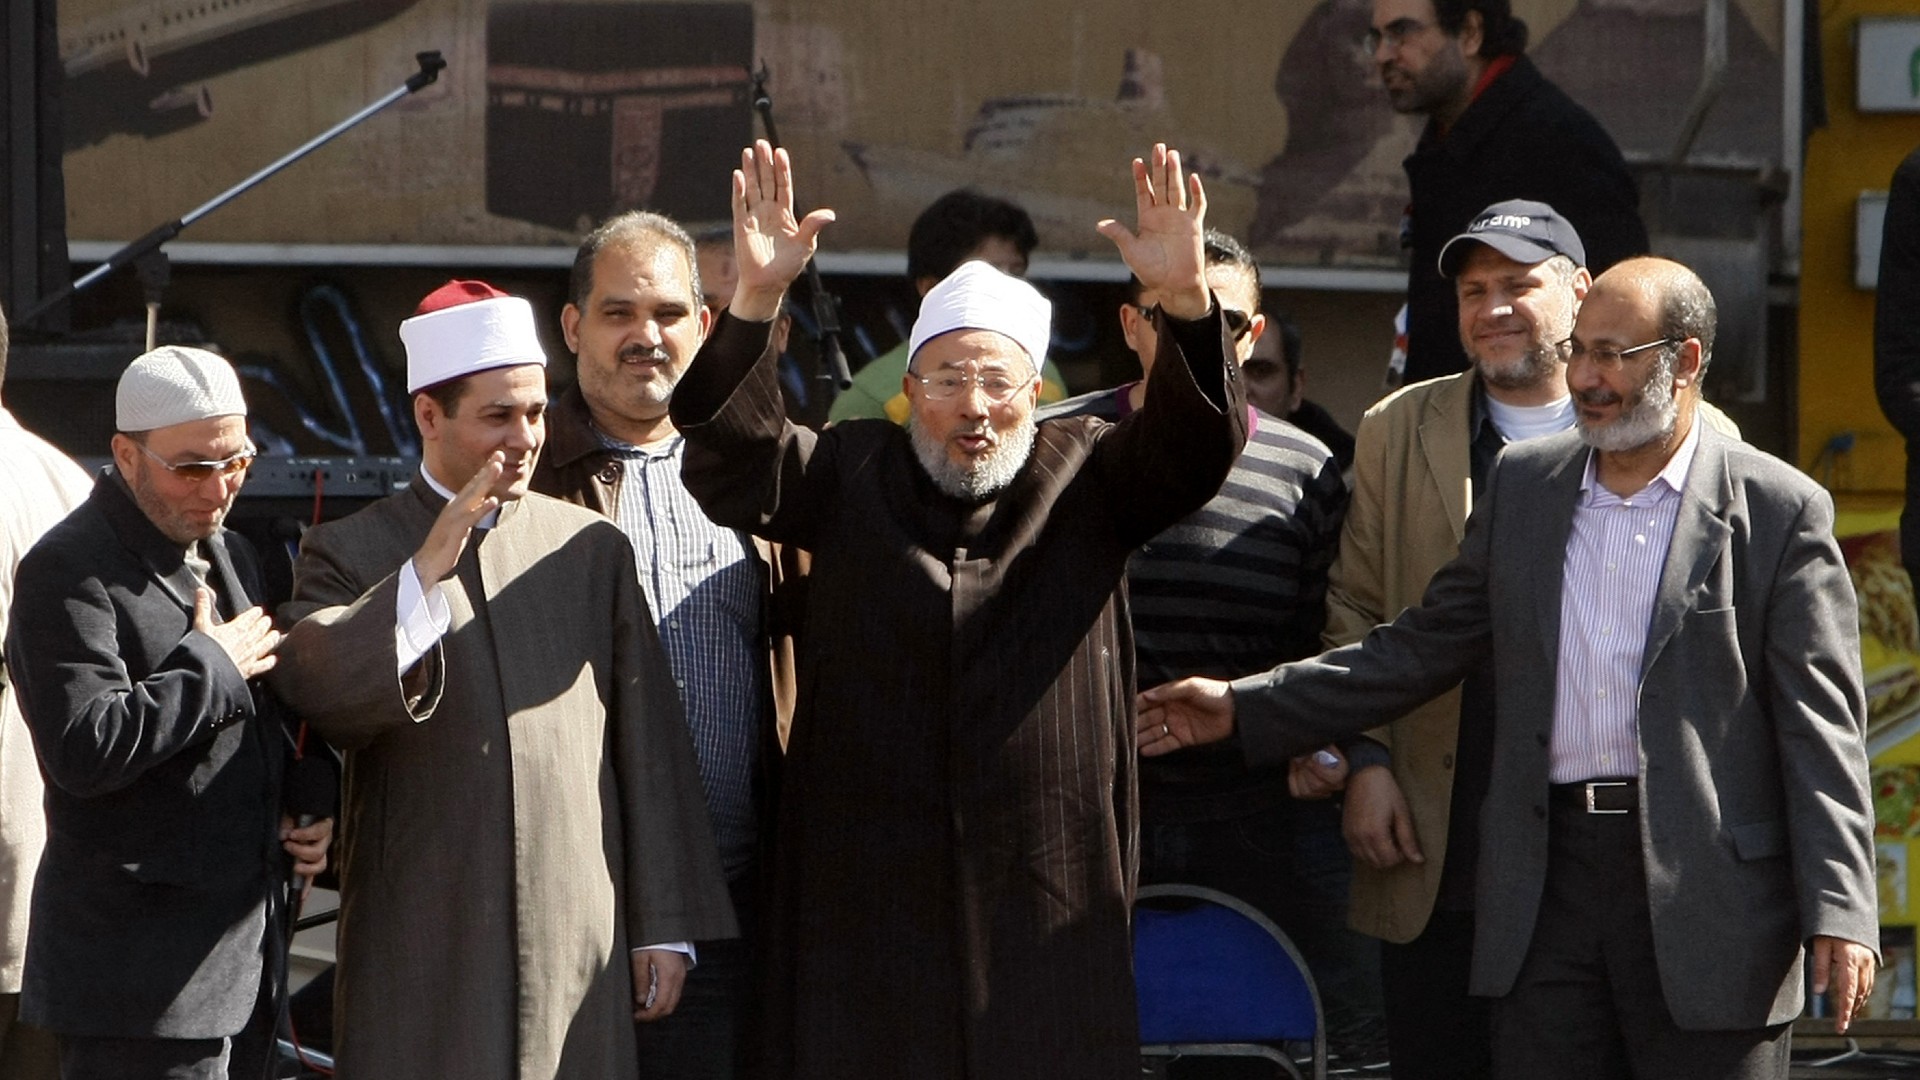 Egyptian-born Muslim cleric, Sheikh Yussef al-Qaradawi (C), greets the crowds as he stands on a stage before delivering the Friday prayer sermon at Cairo's central Tahrir Square on February 18, 2011 